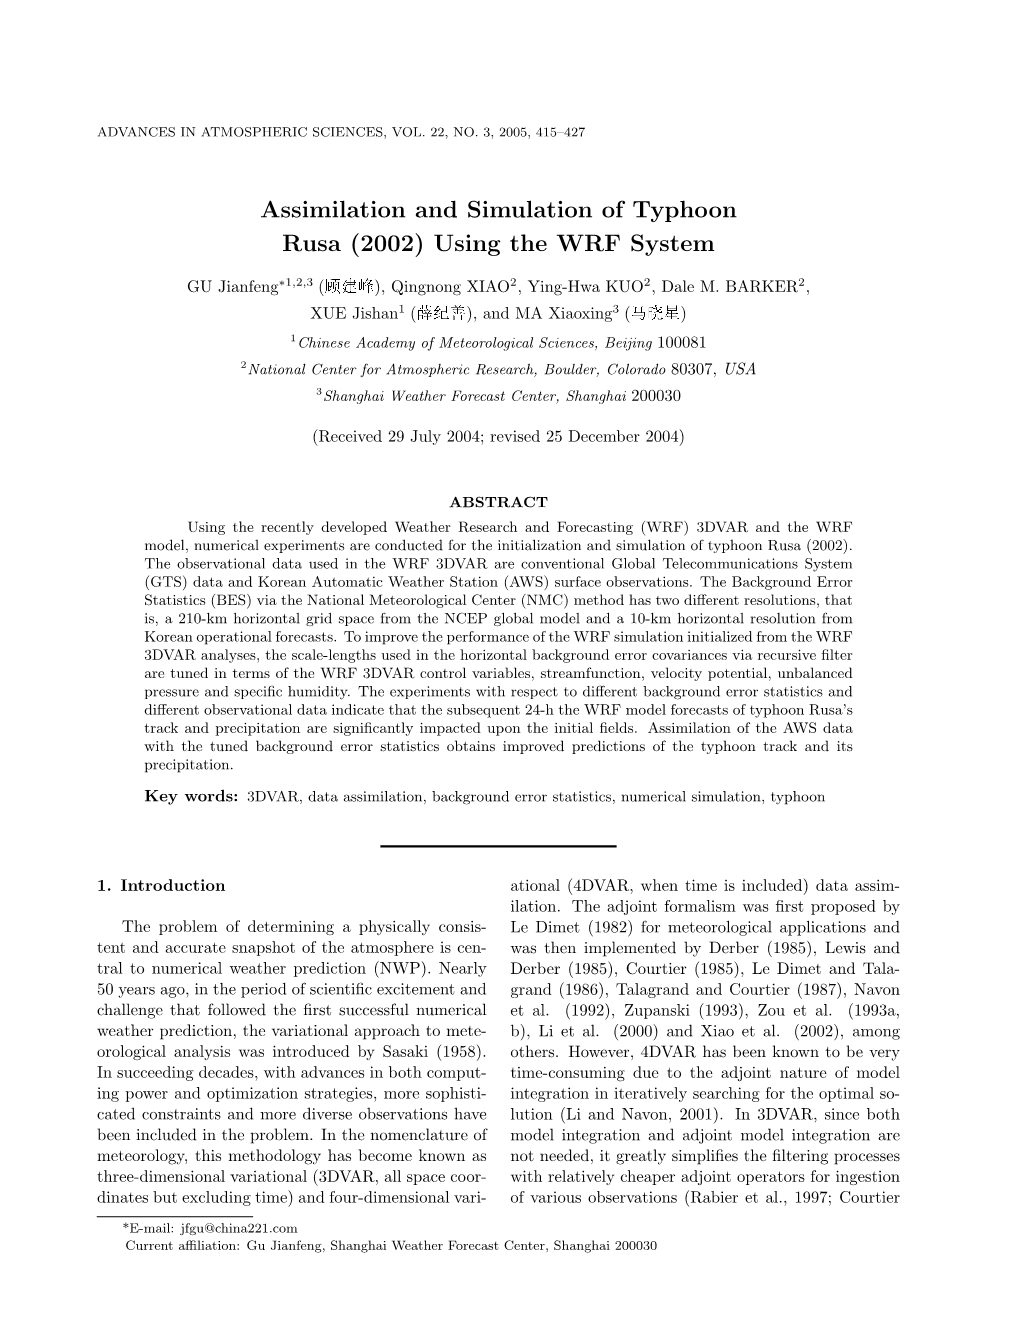 Assimilation and Simulation of Typhoon Rusa (2002) Using the WRF System